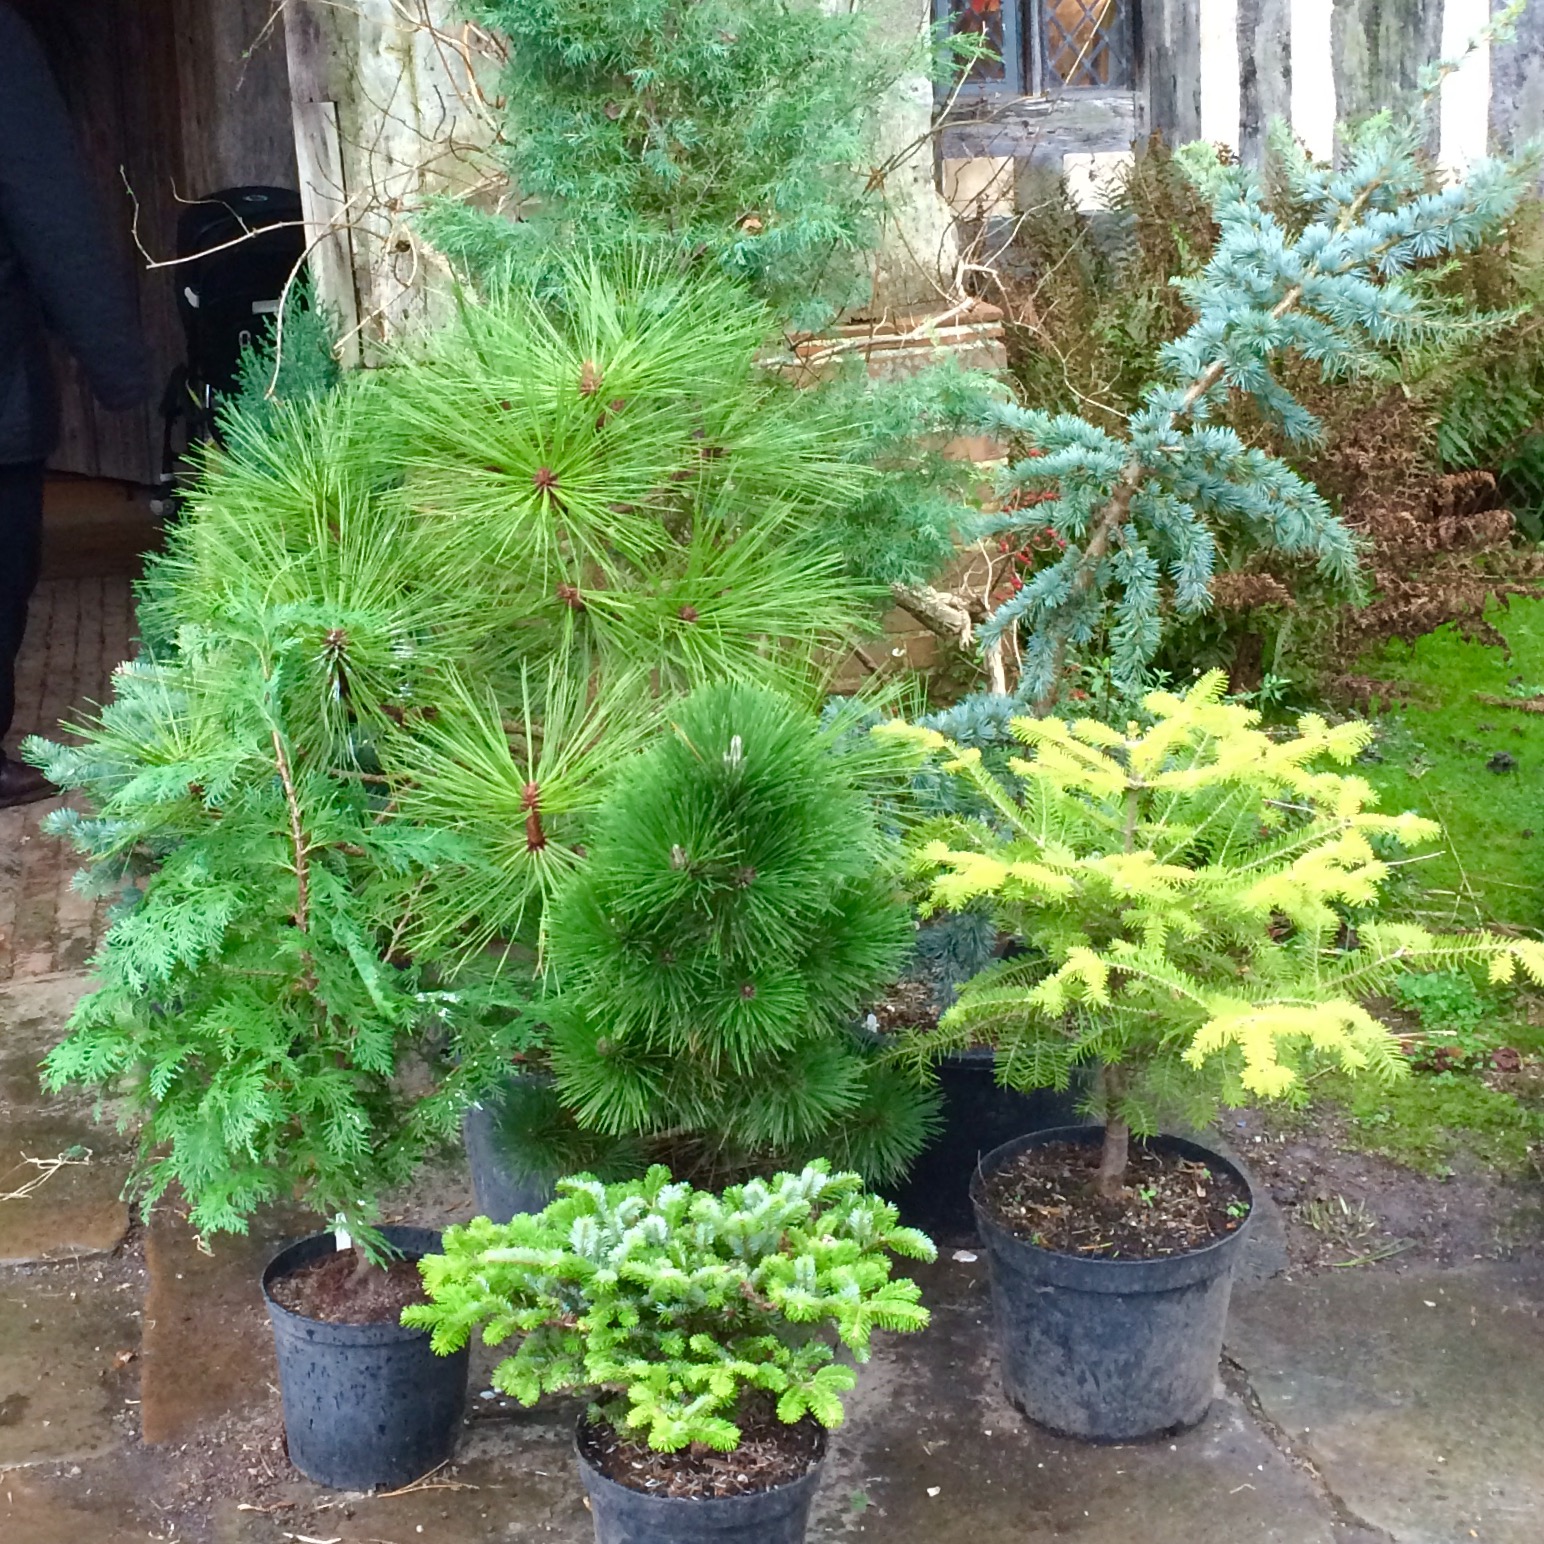 Conifers in pots as garden Christmas decorations